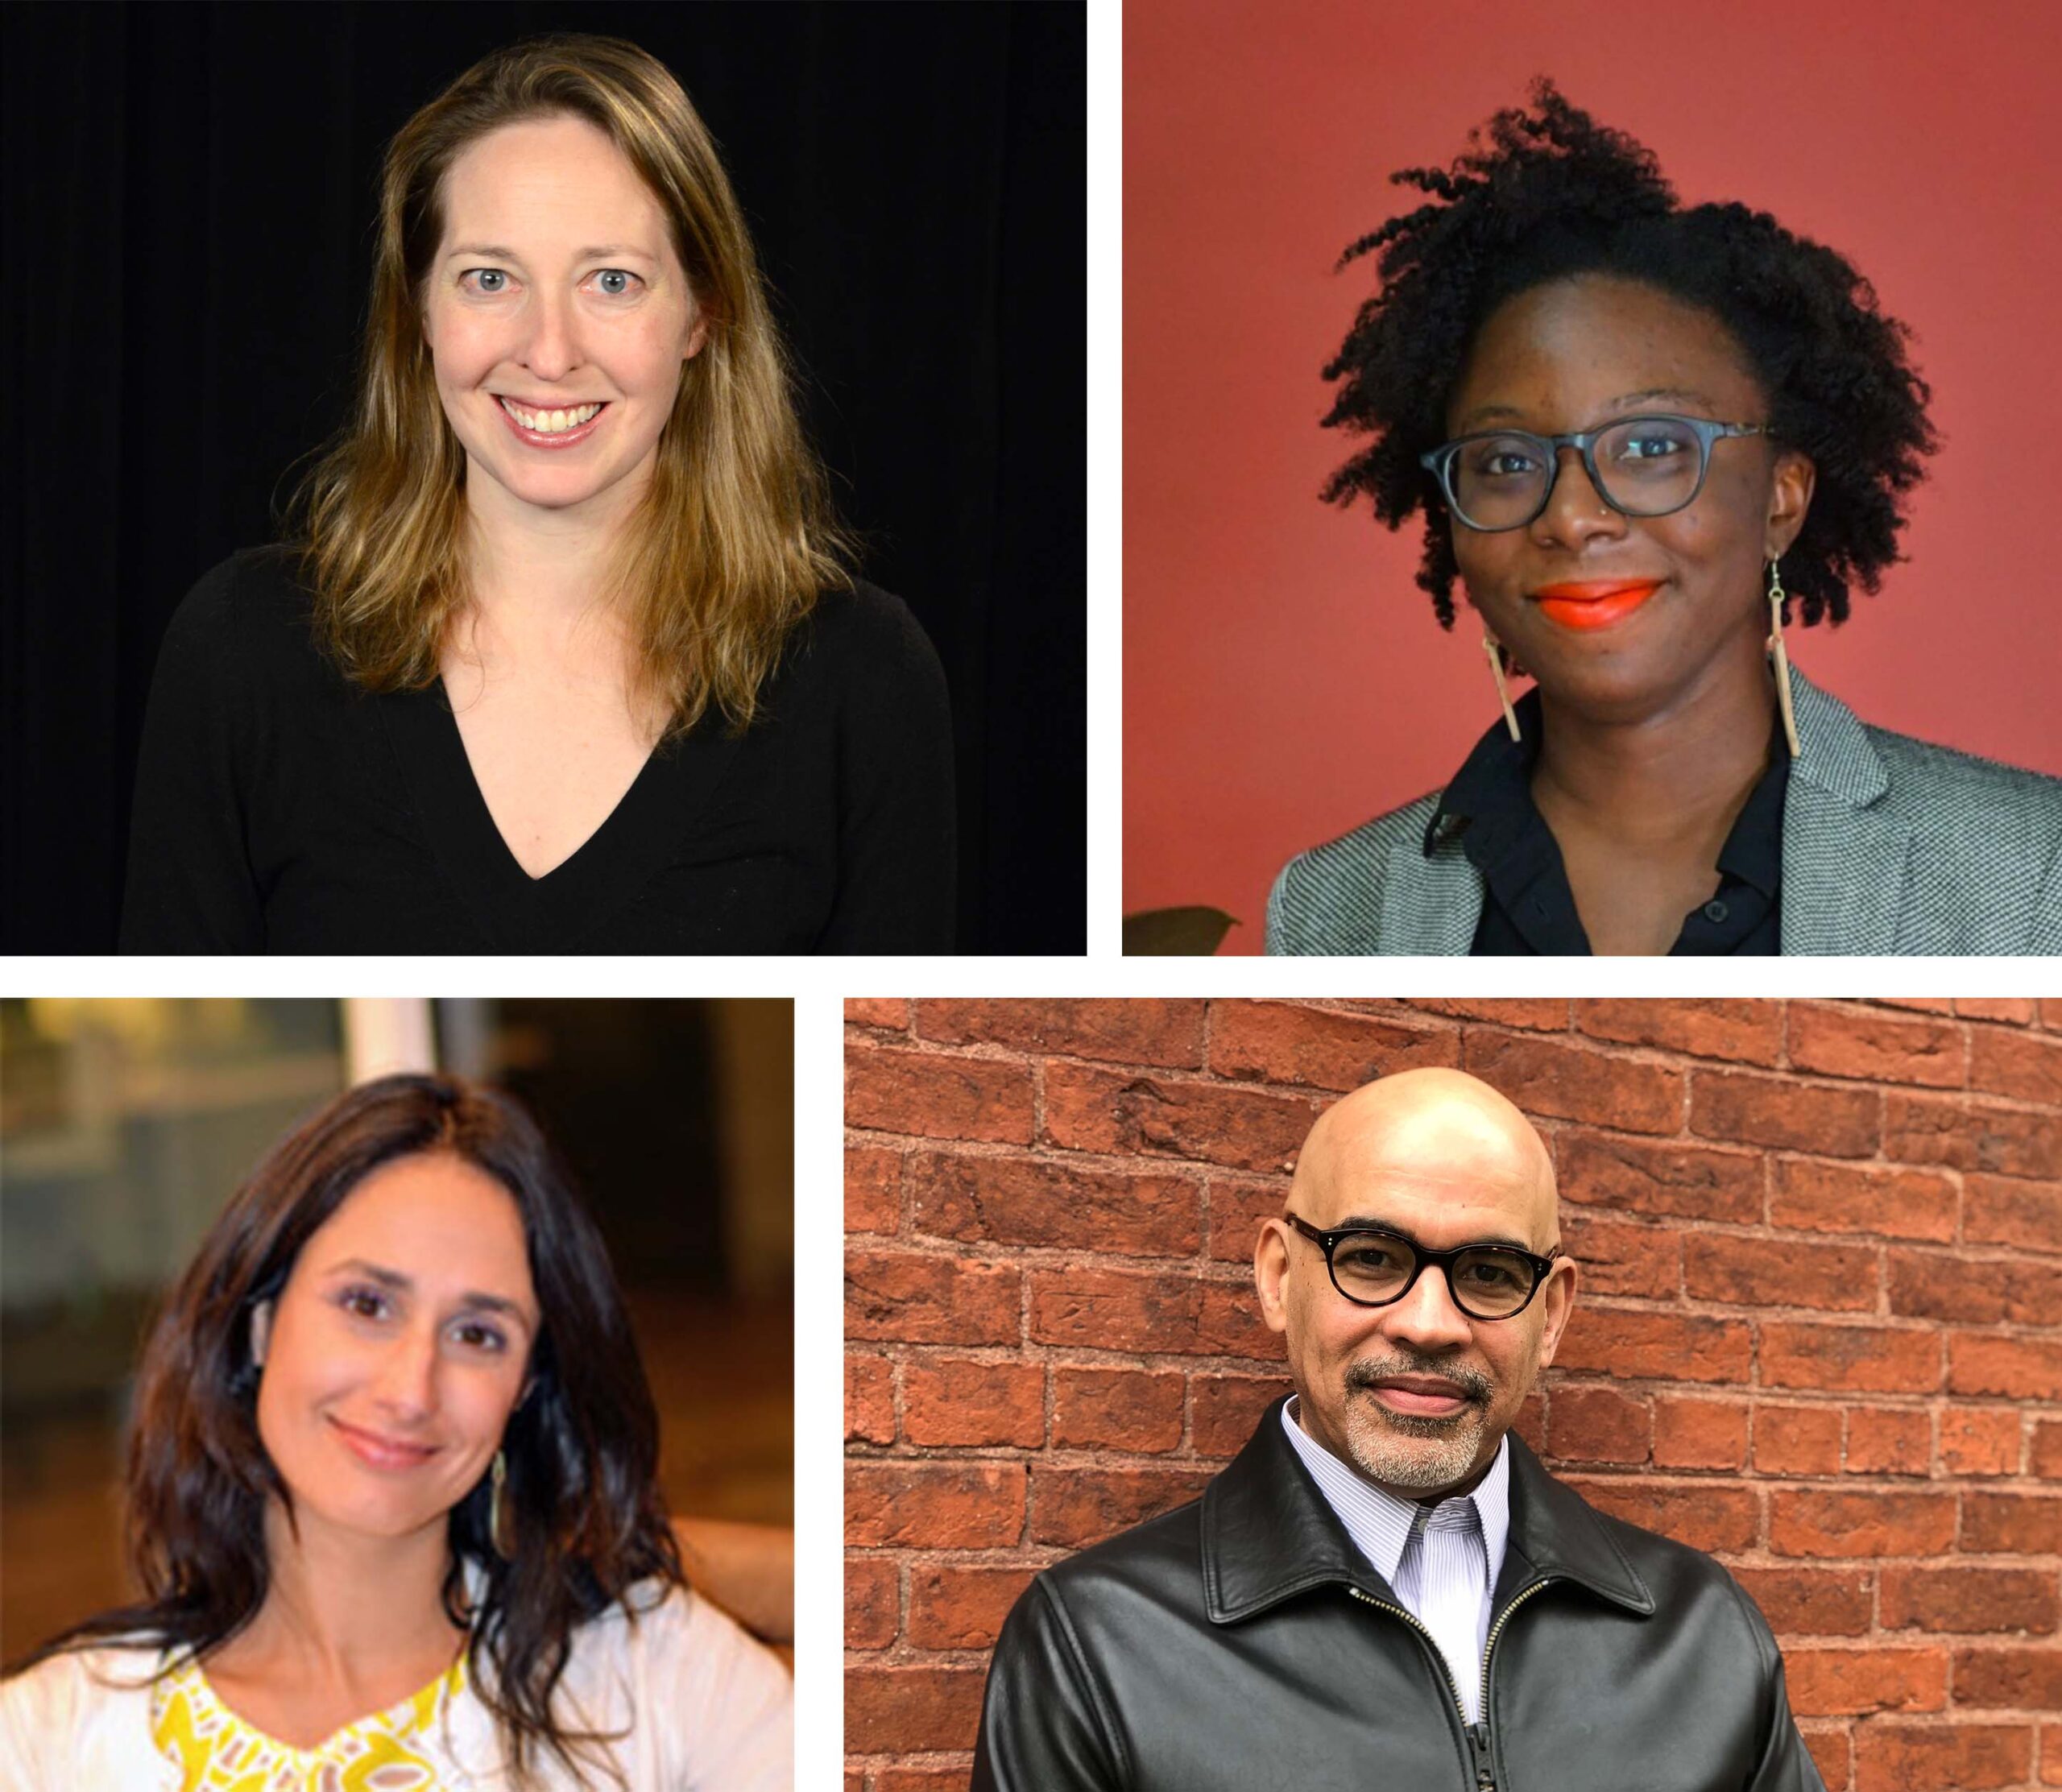 The Common Adds Editors and Educator to Board of Directors